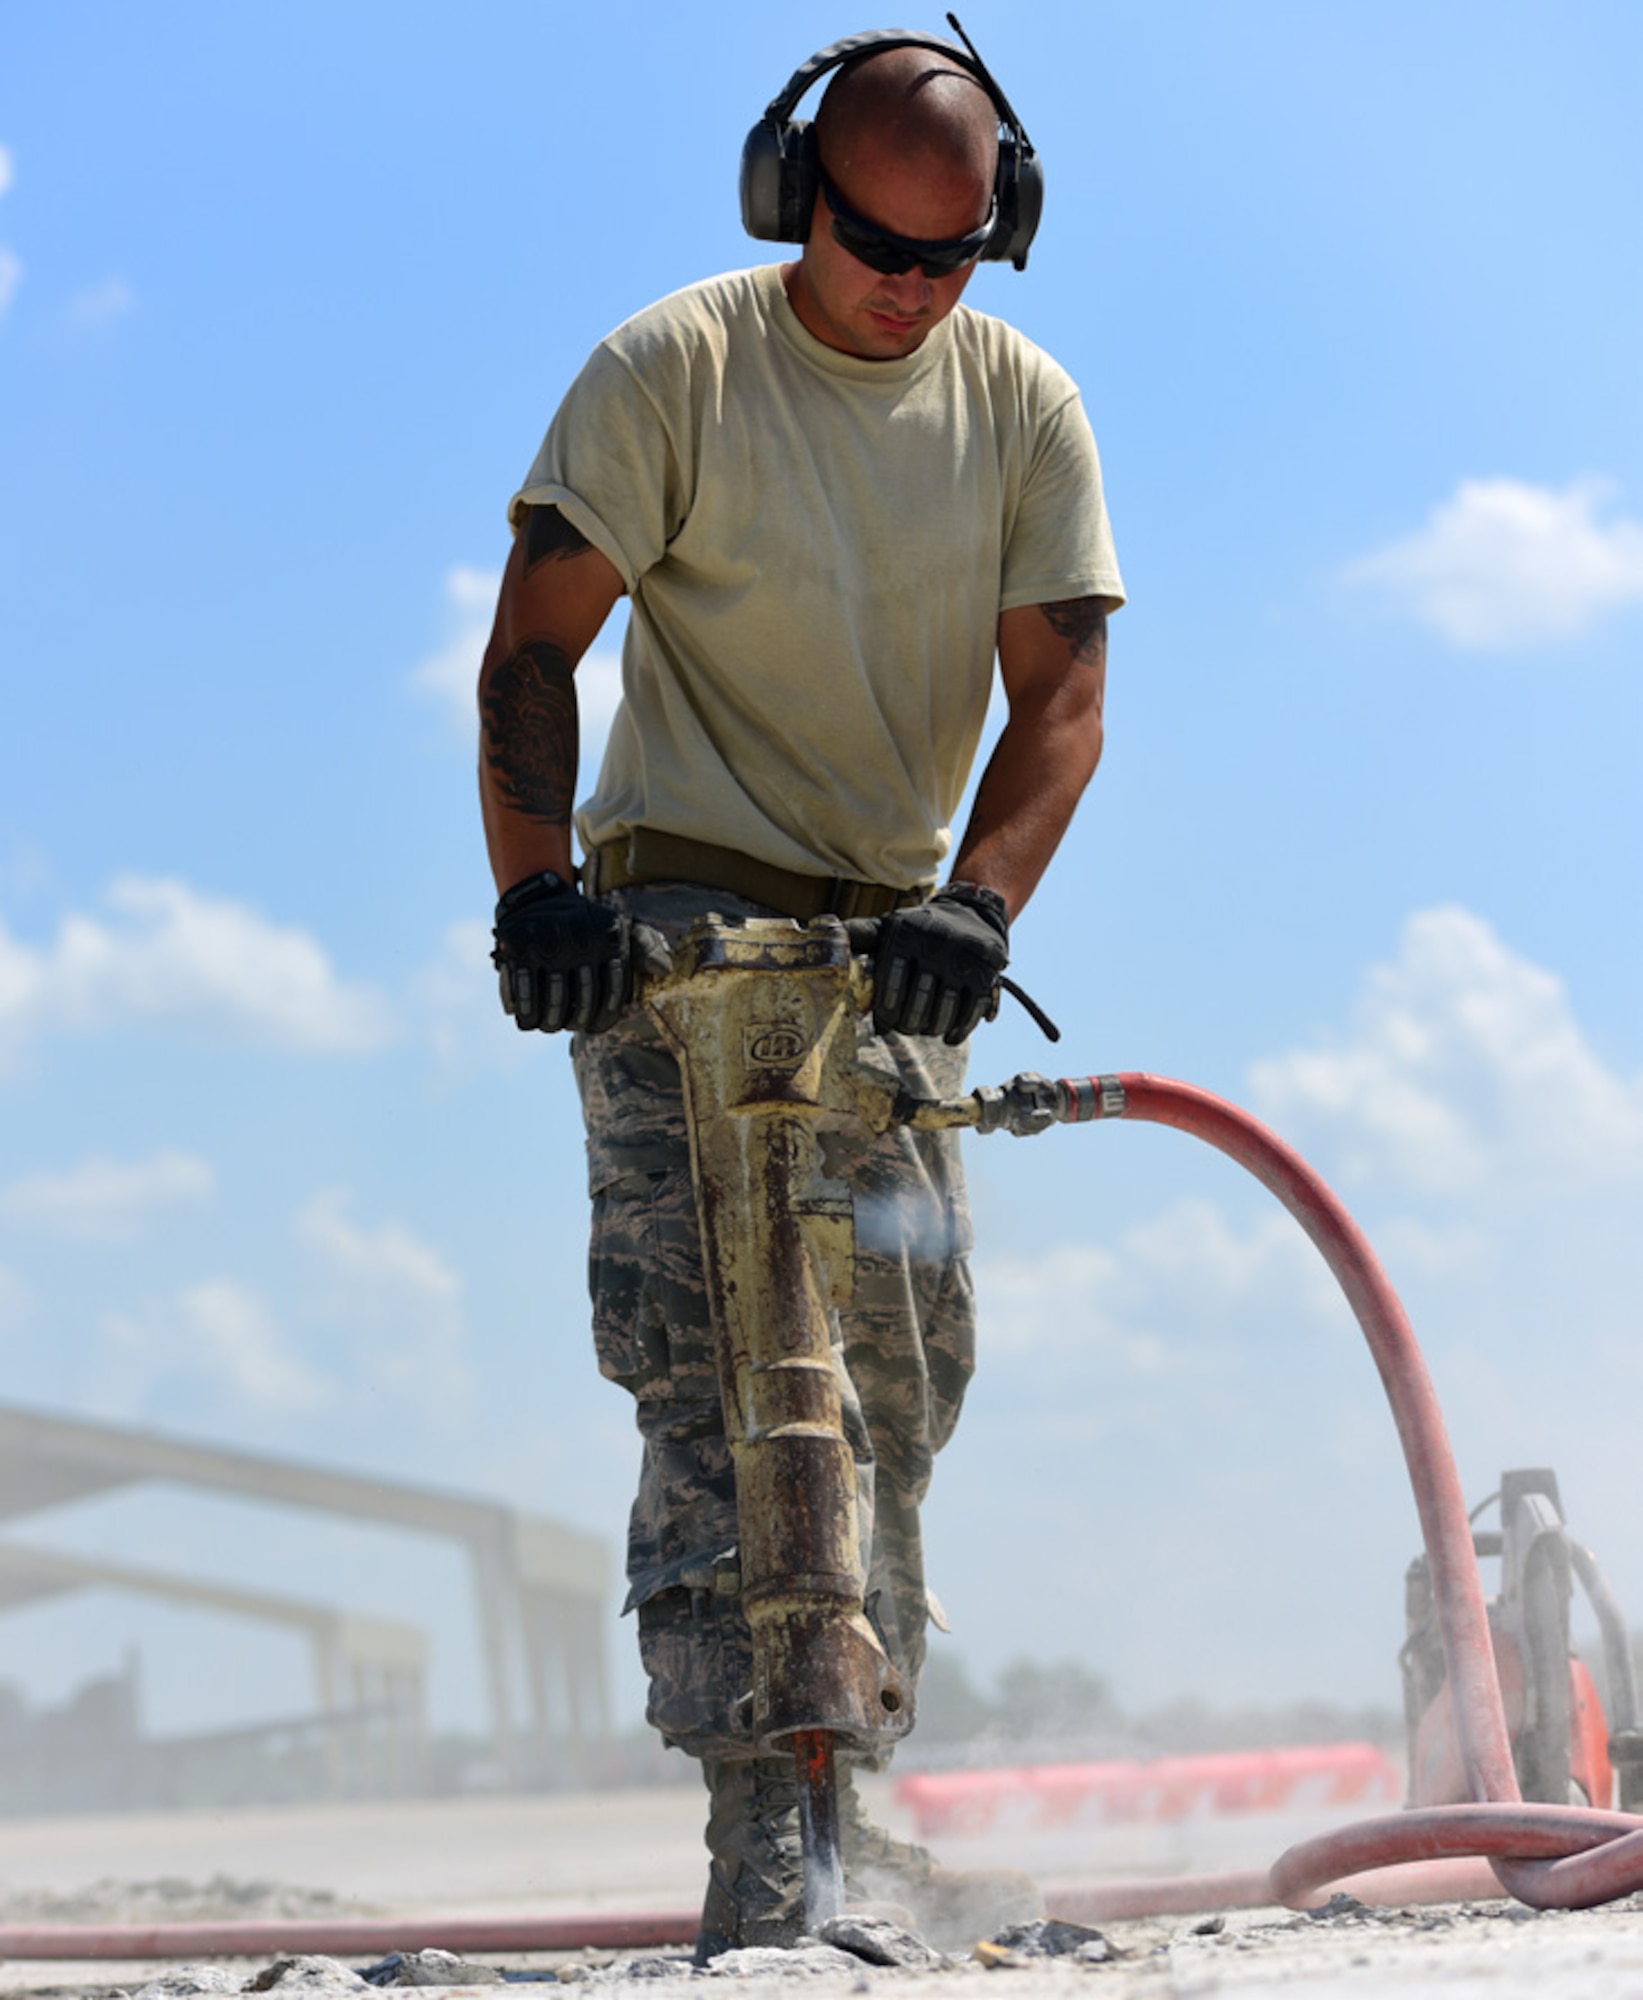 U.S. Air Force Staff Sgt. Warocz, a 509th Civil Engineer Squadron pavement and equipment shop supervisor, uses a jack hammer at Whiteman Air Force Base, Mo., July 25, 2017. Members of the shop, known as “Dirtboyz,” refurbished 19 yards of concrete on the flightline, enabling taxiway K to be operational again.